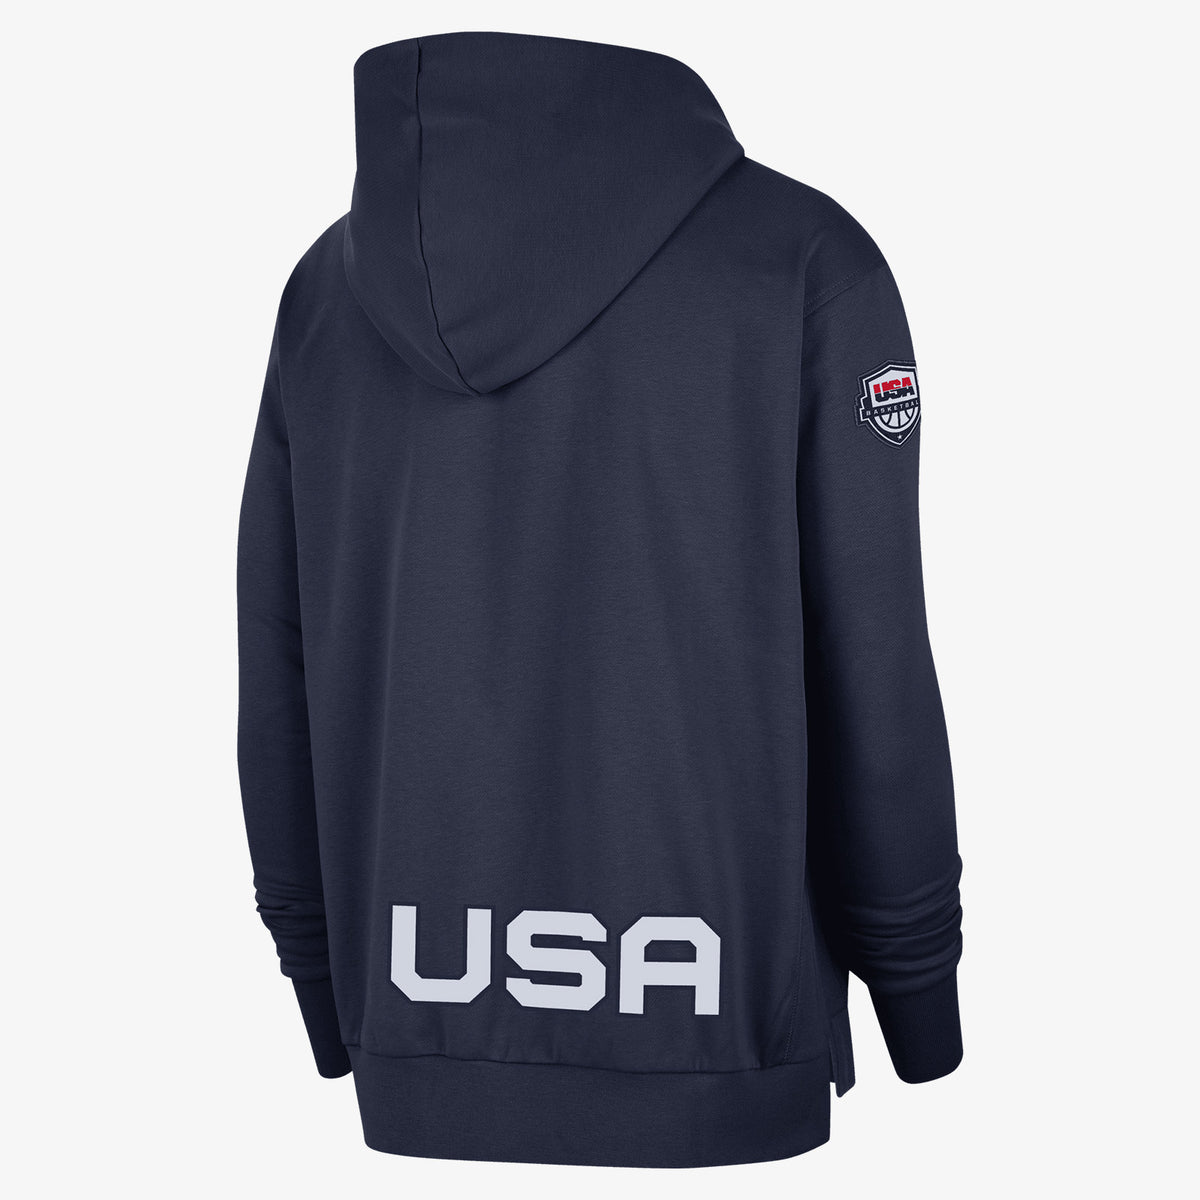 Team USA Standard Issue Dri-FIT Pullover Hoodie - Navy